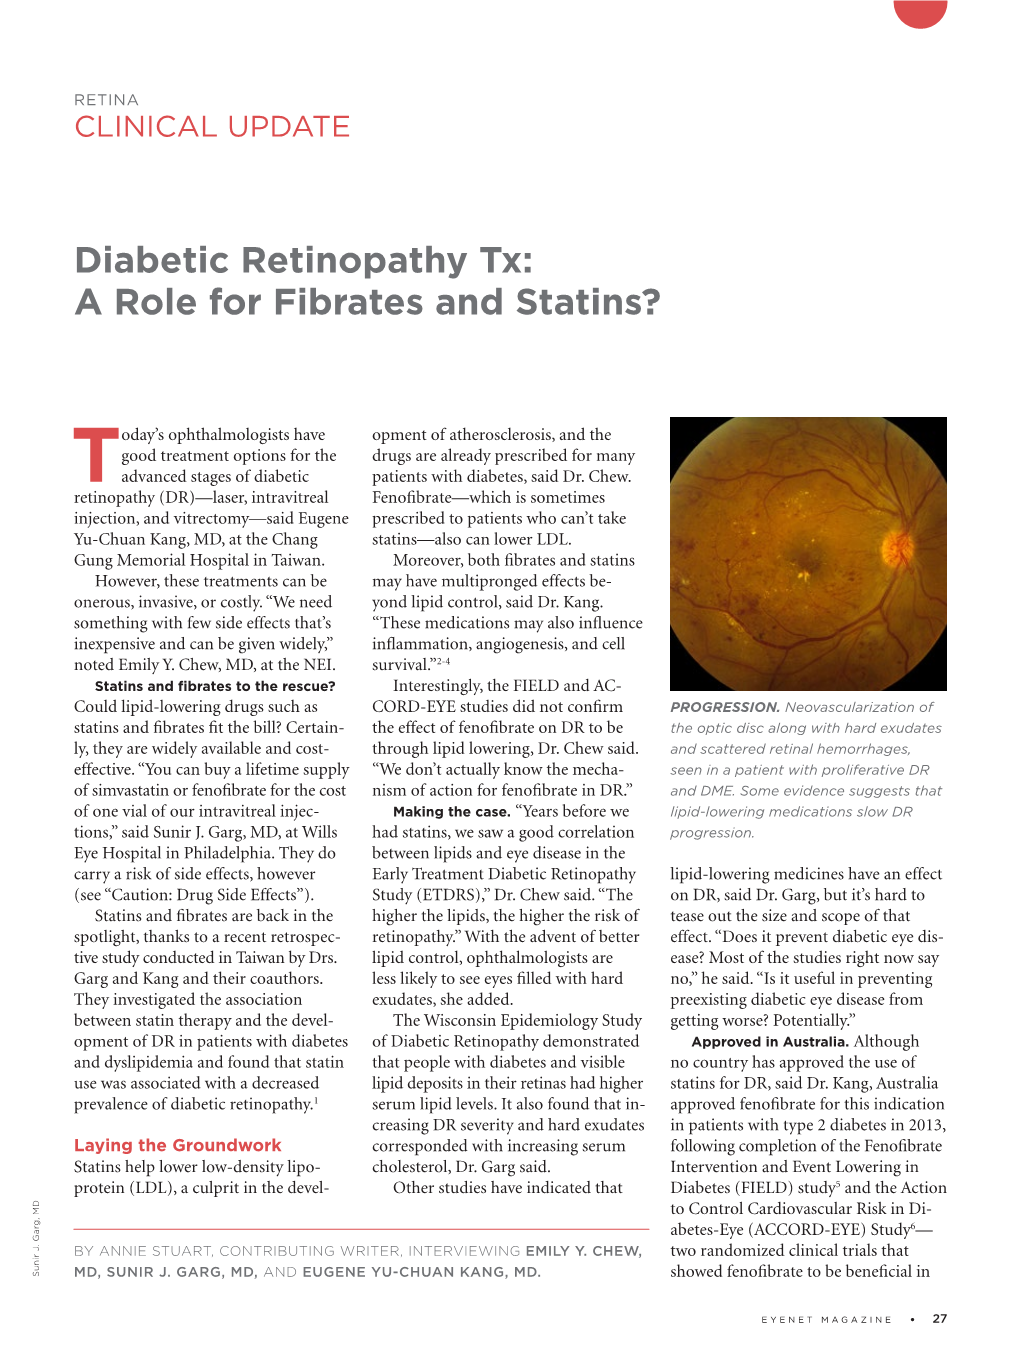 Diabetic Retinopathy Tx: a Role for Fibrates and Statins?